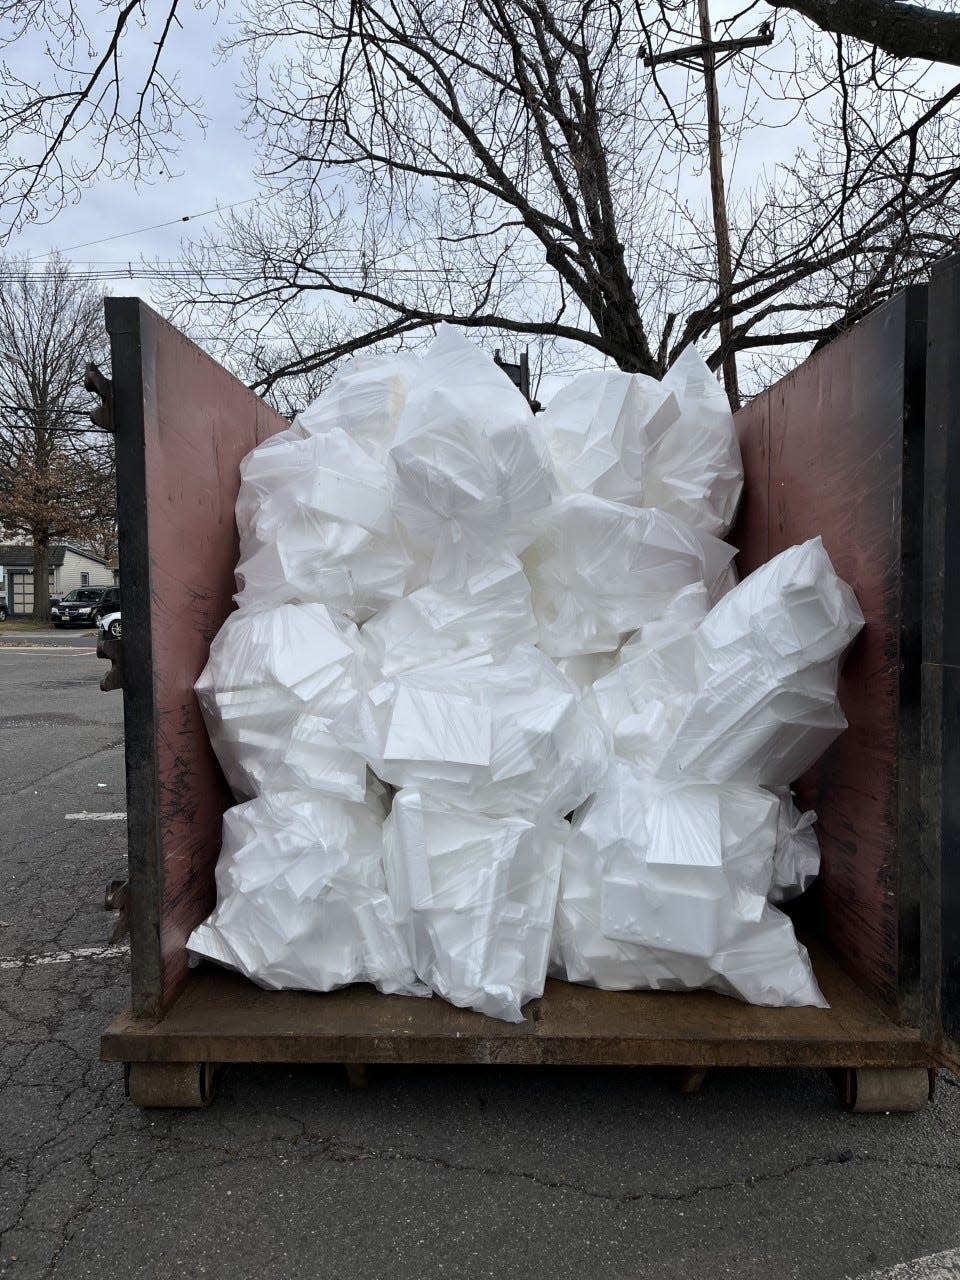 The city of Clifton may soon be the repository of polystyrene products for Passaic County.